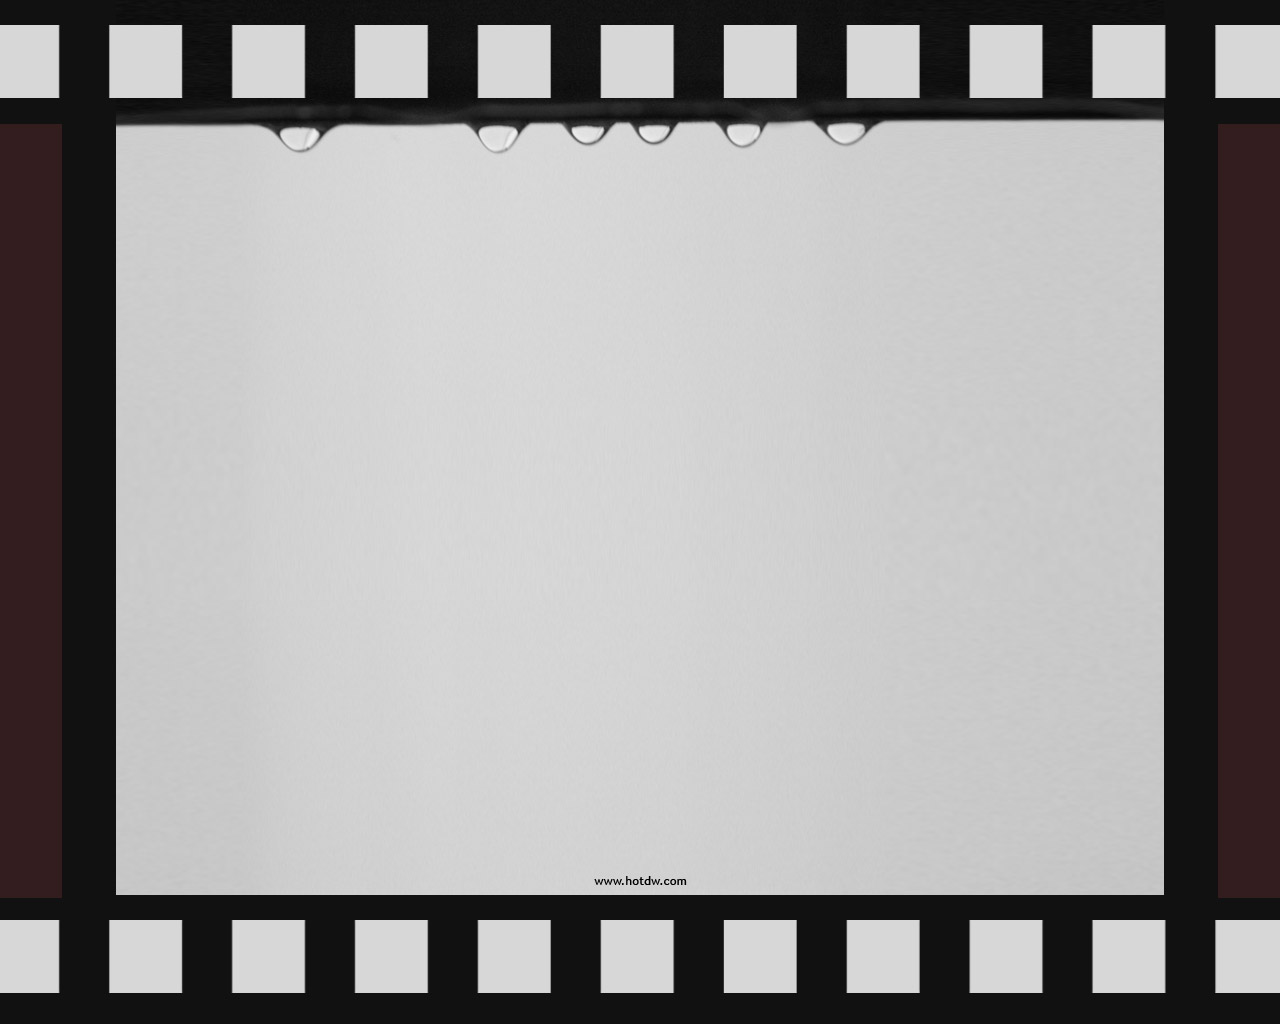 Film background clipart 